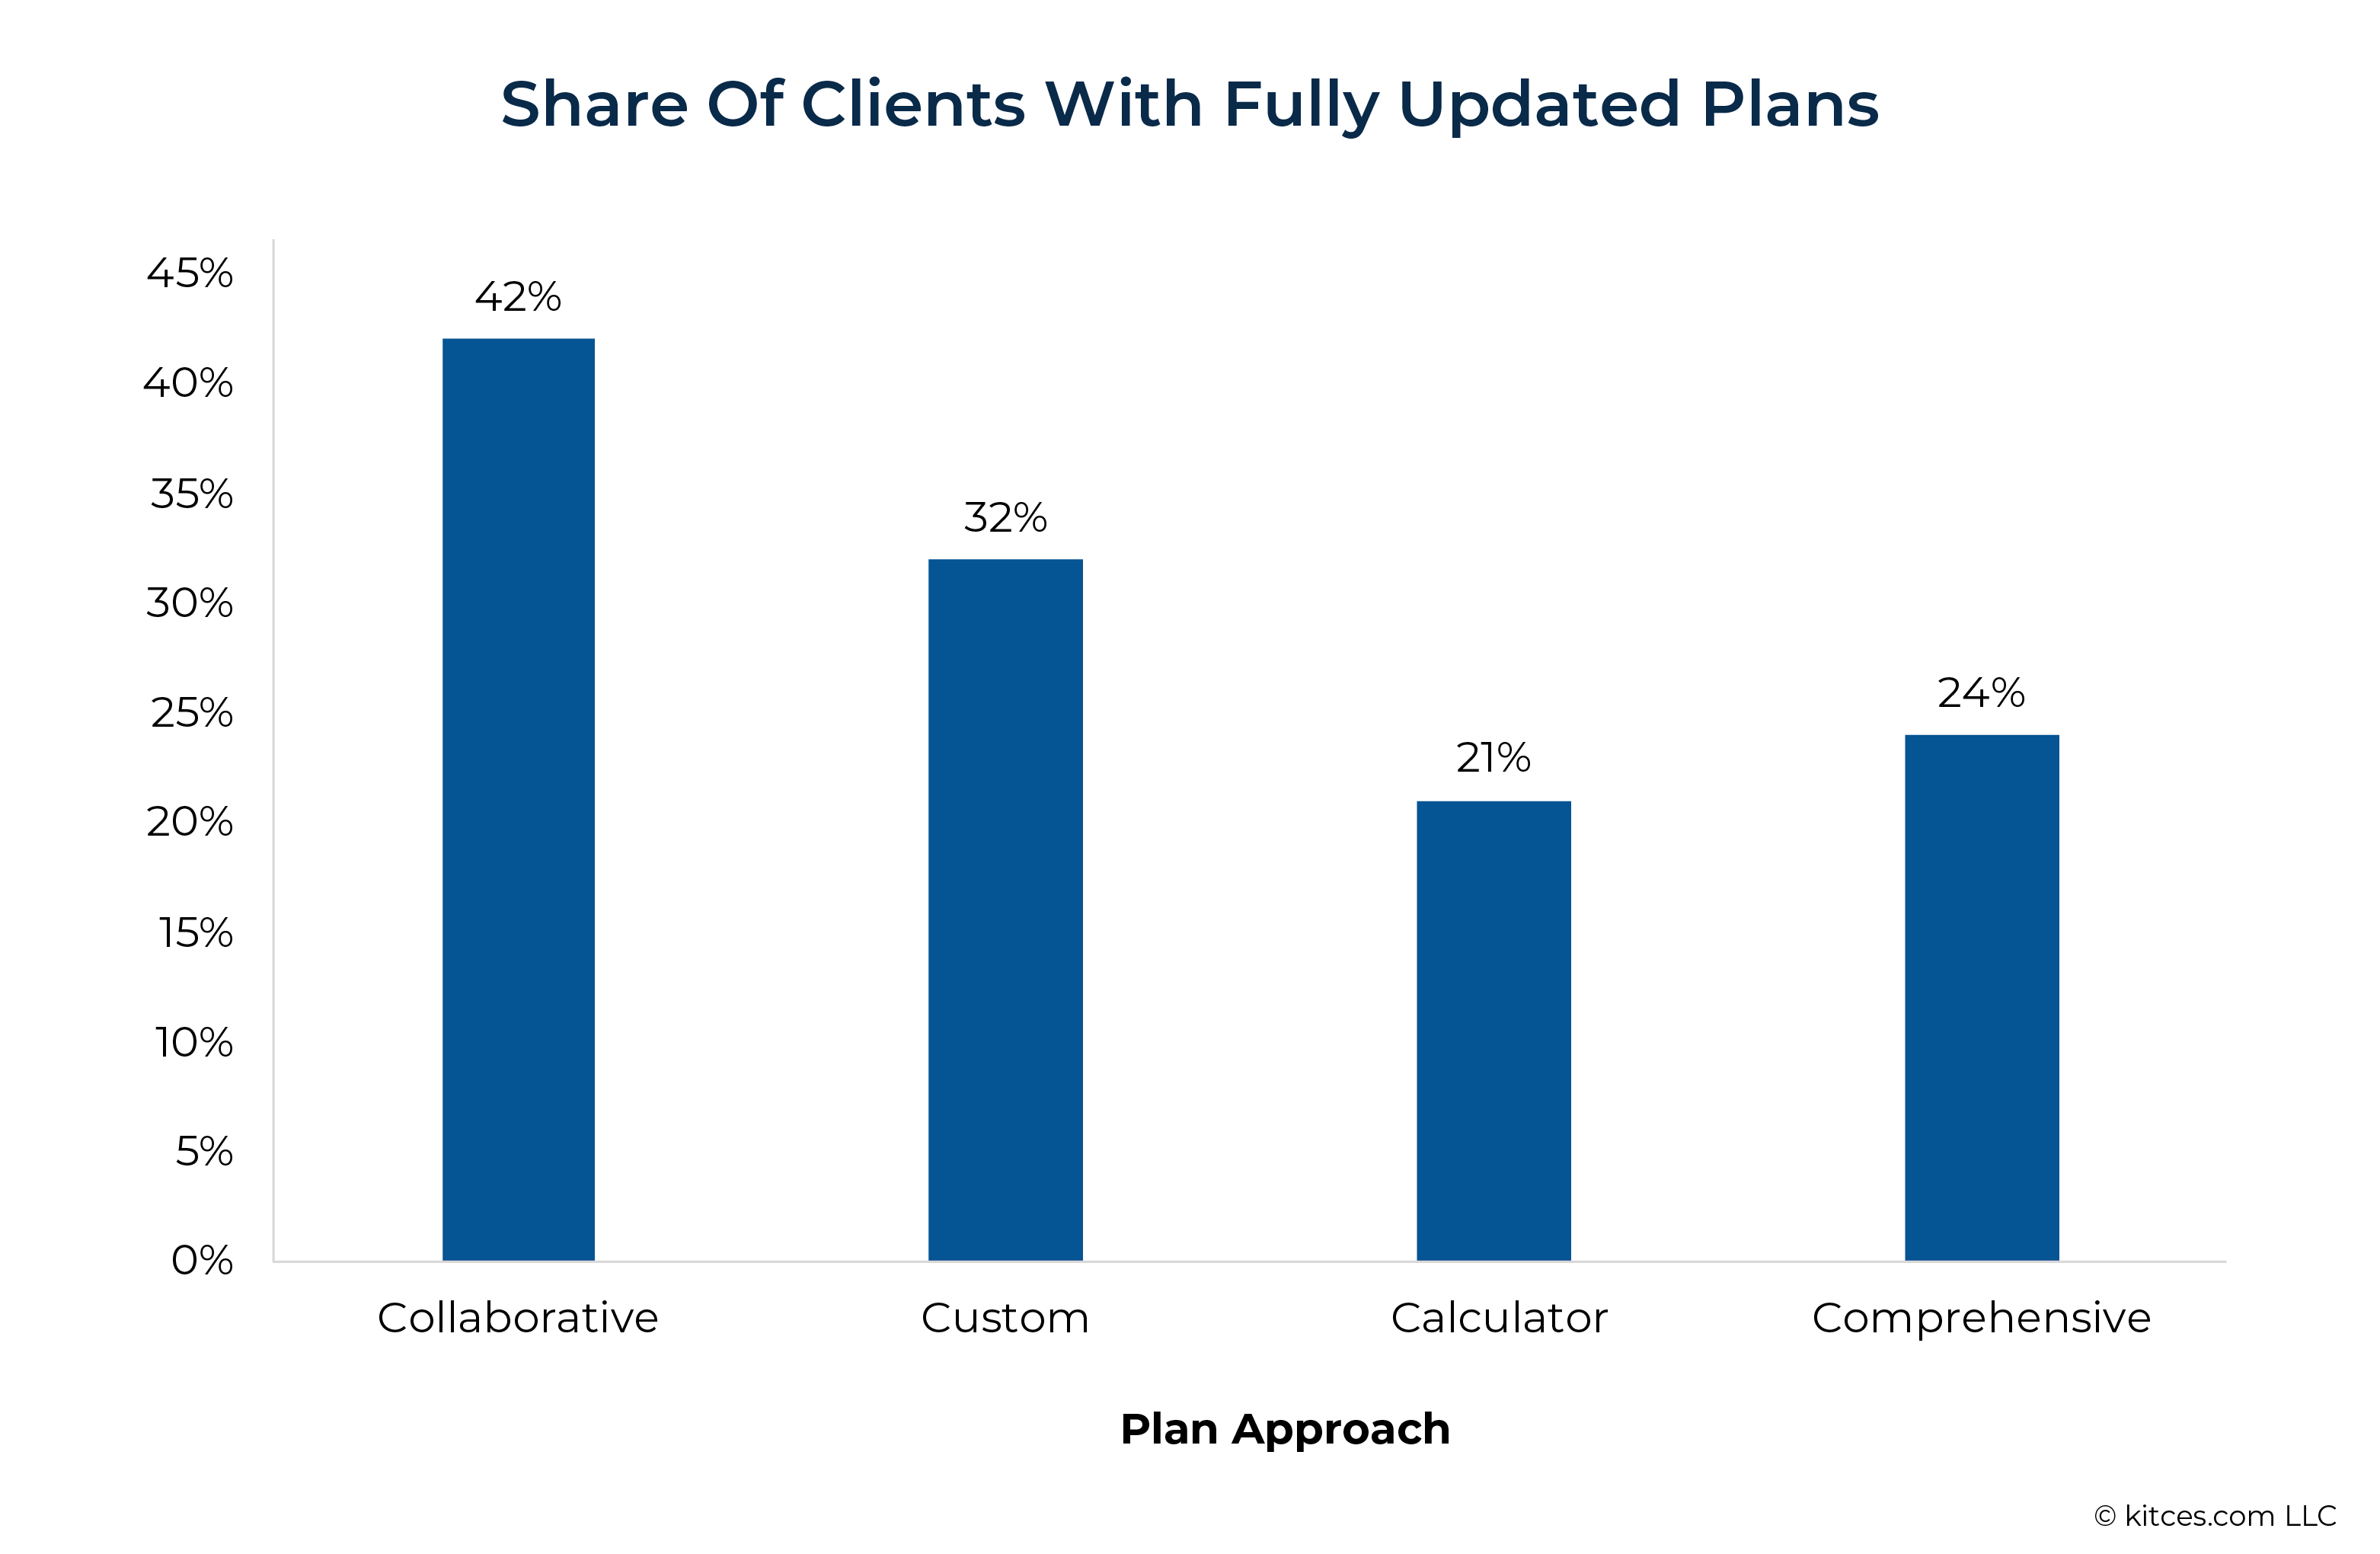 Share Of Clients With Fully Updated Plans